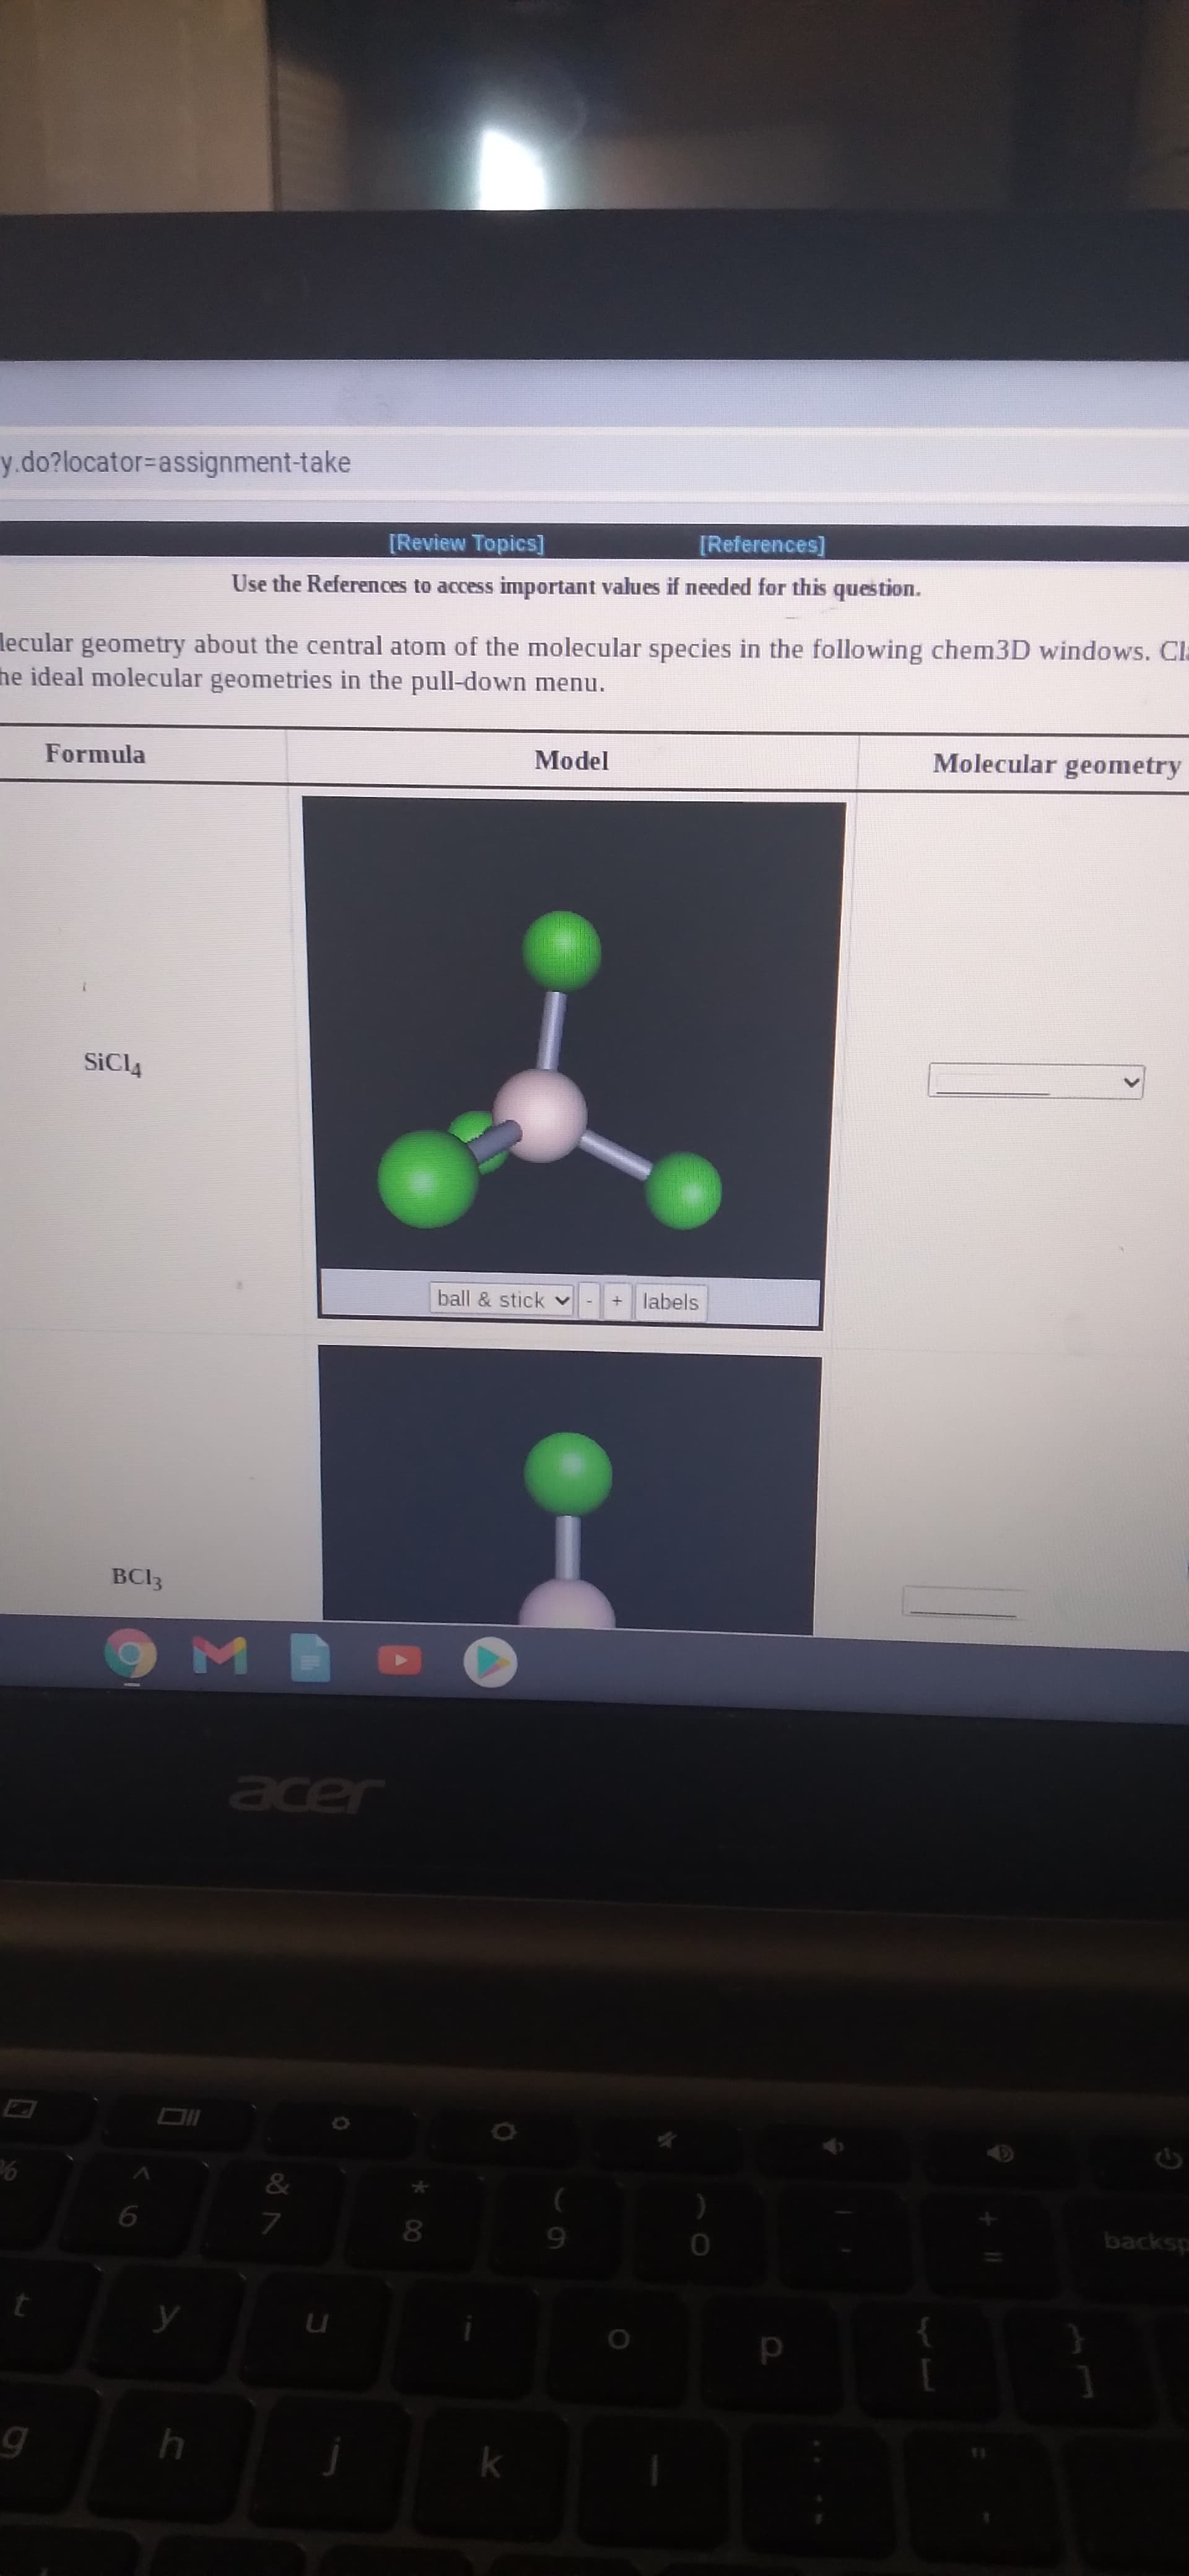 geometry about the central atom of the molecular species in the following chem3D windows
